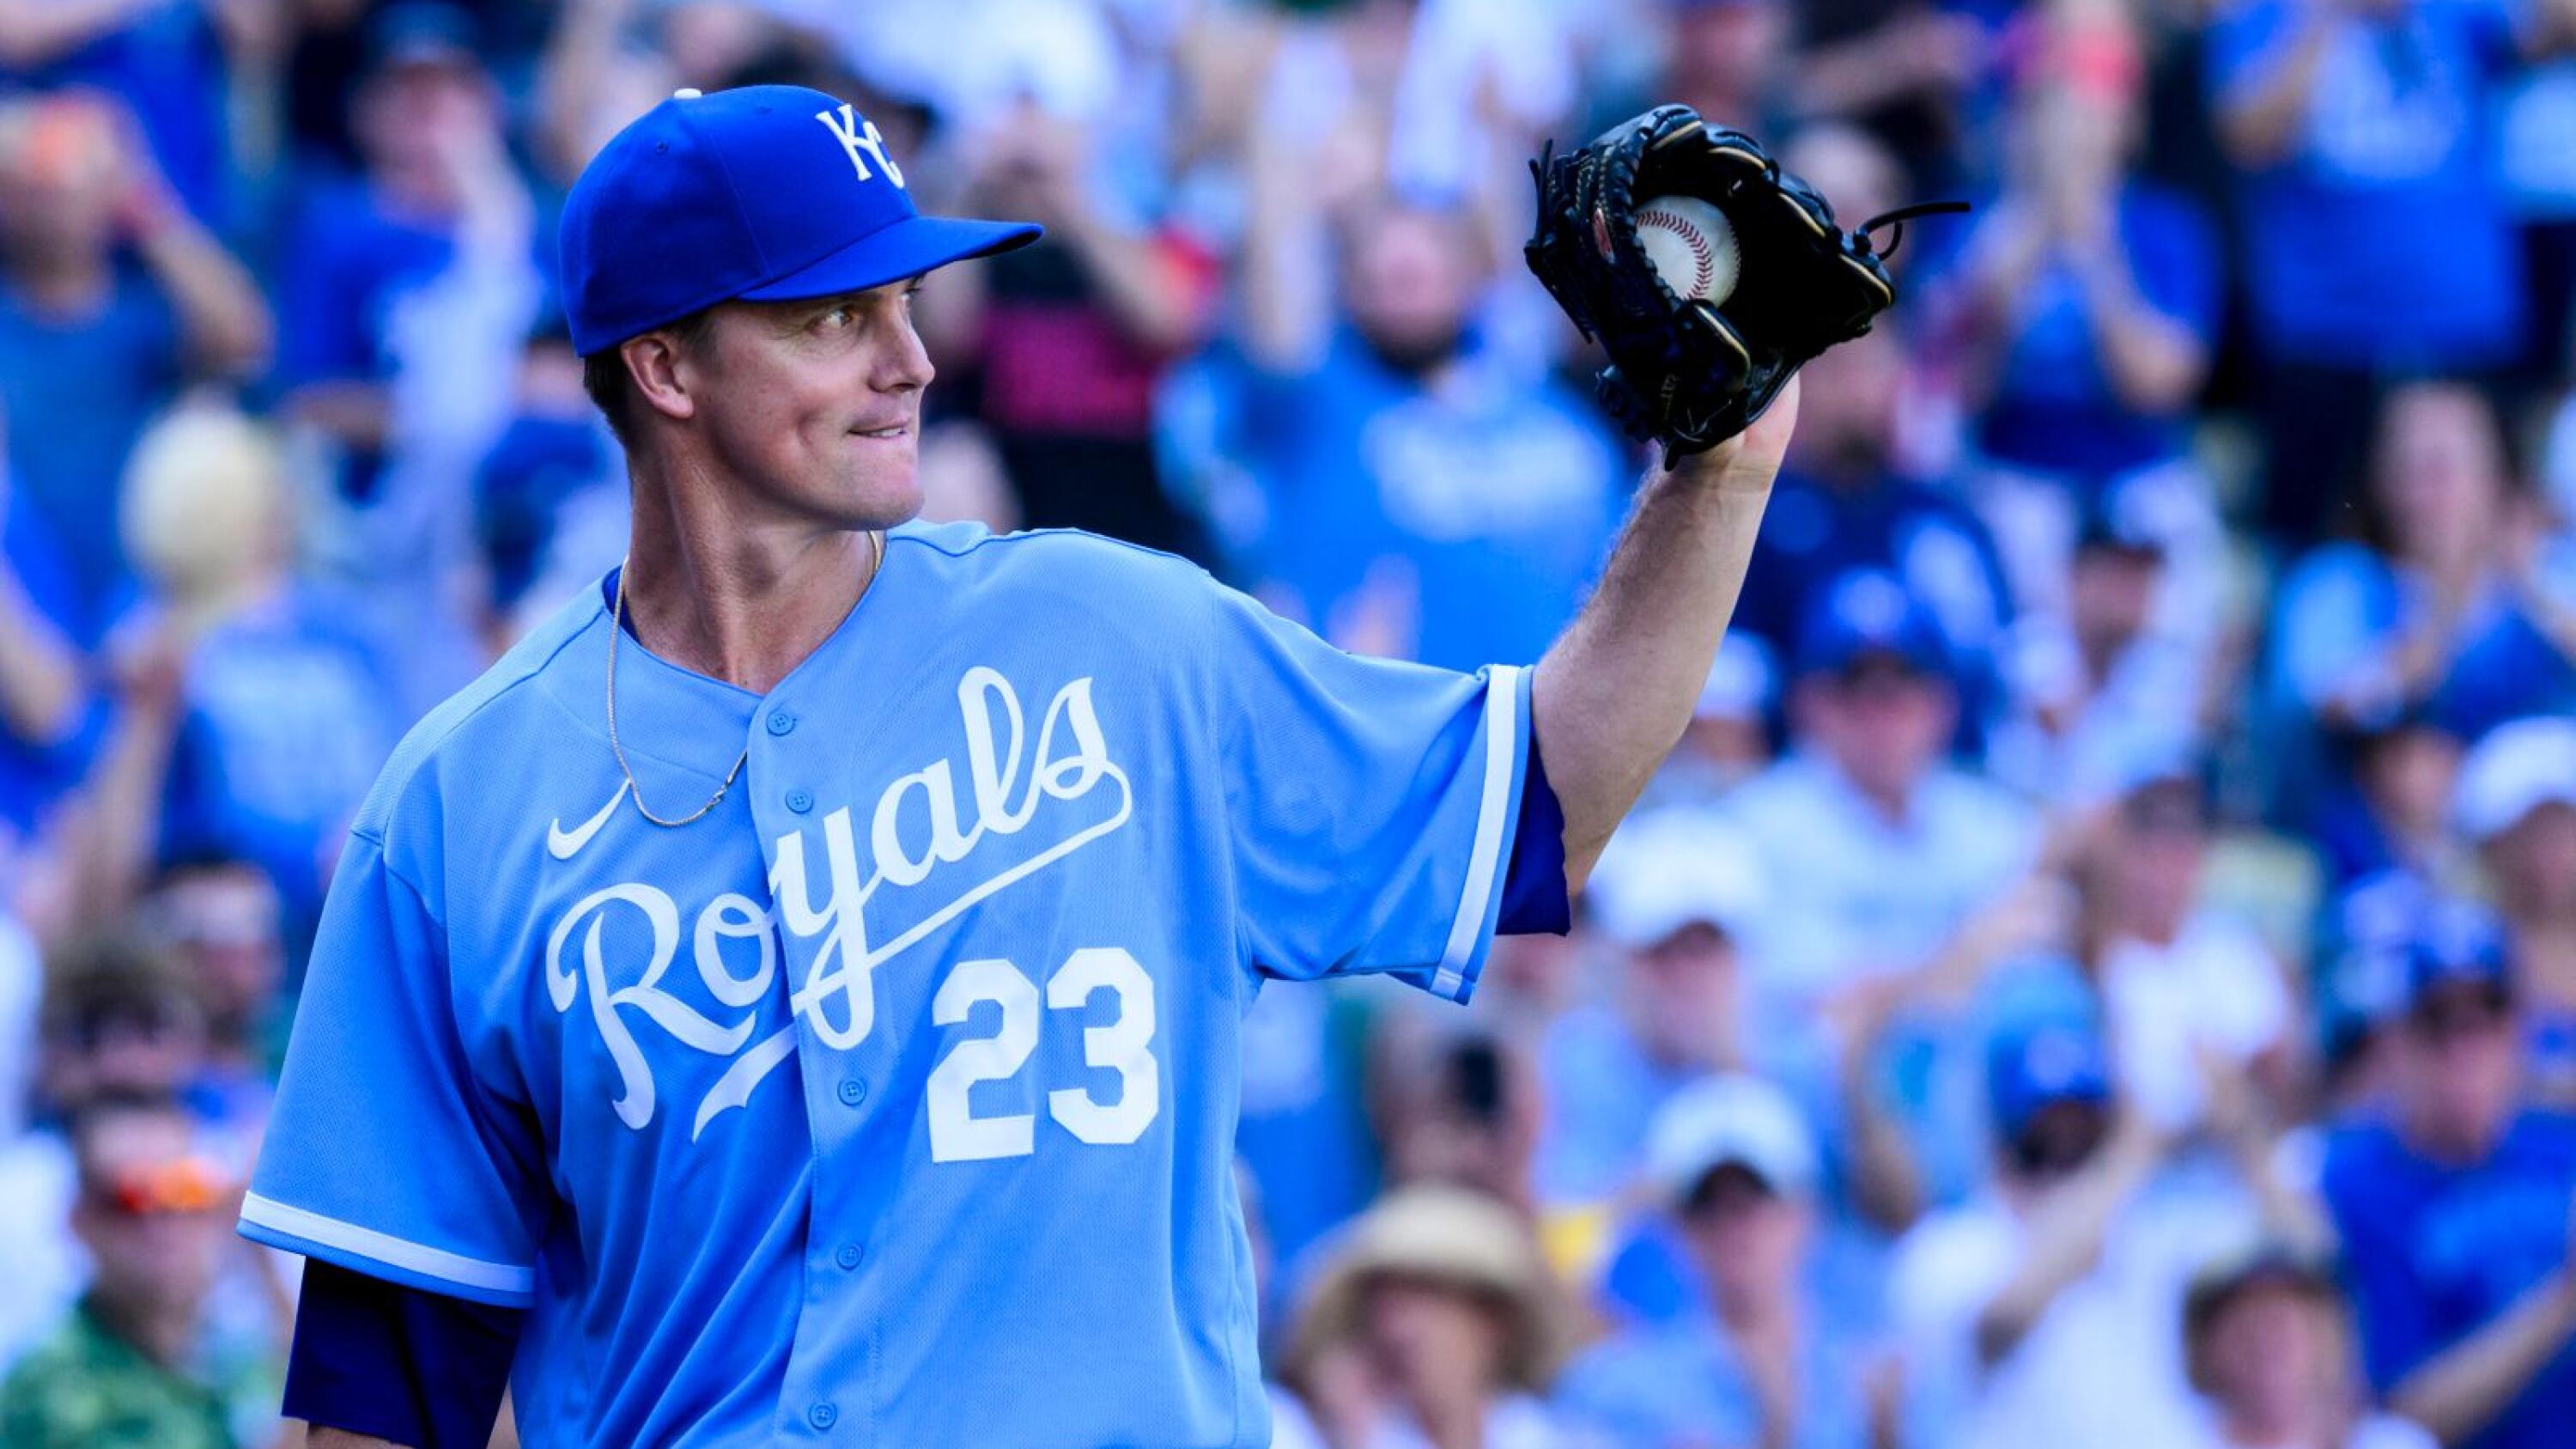 Zack Greinke pitches Royals to 5-2 win over Yankees in what could be his  career finale